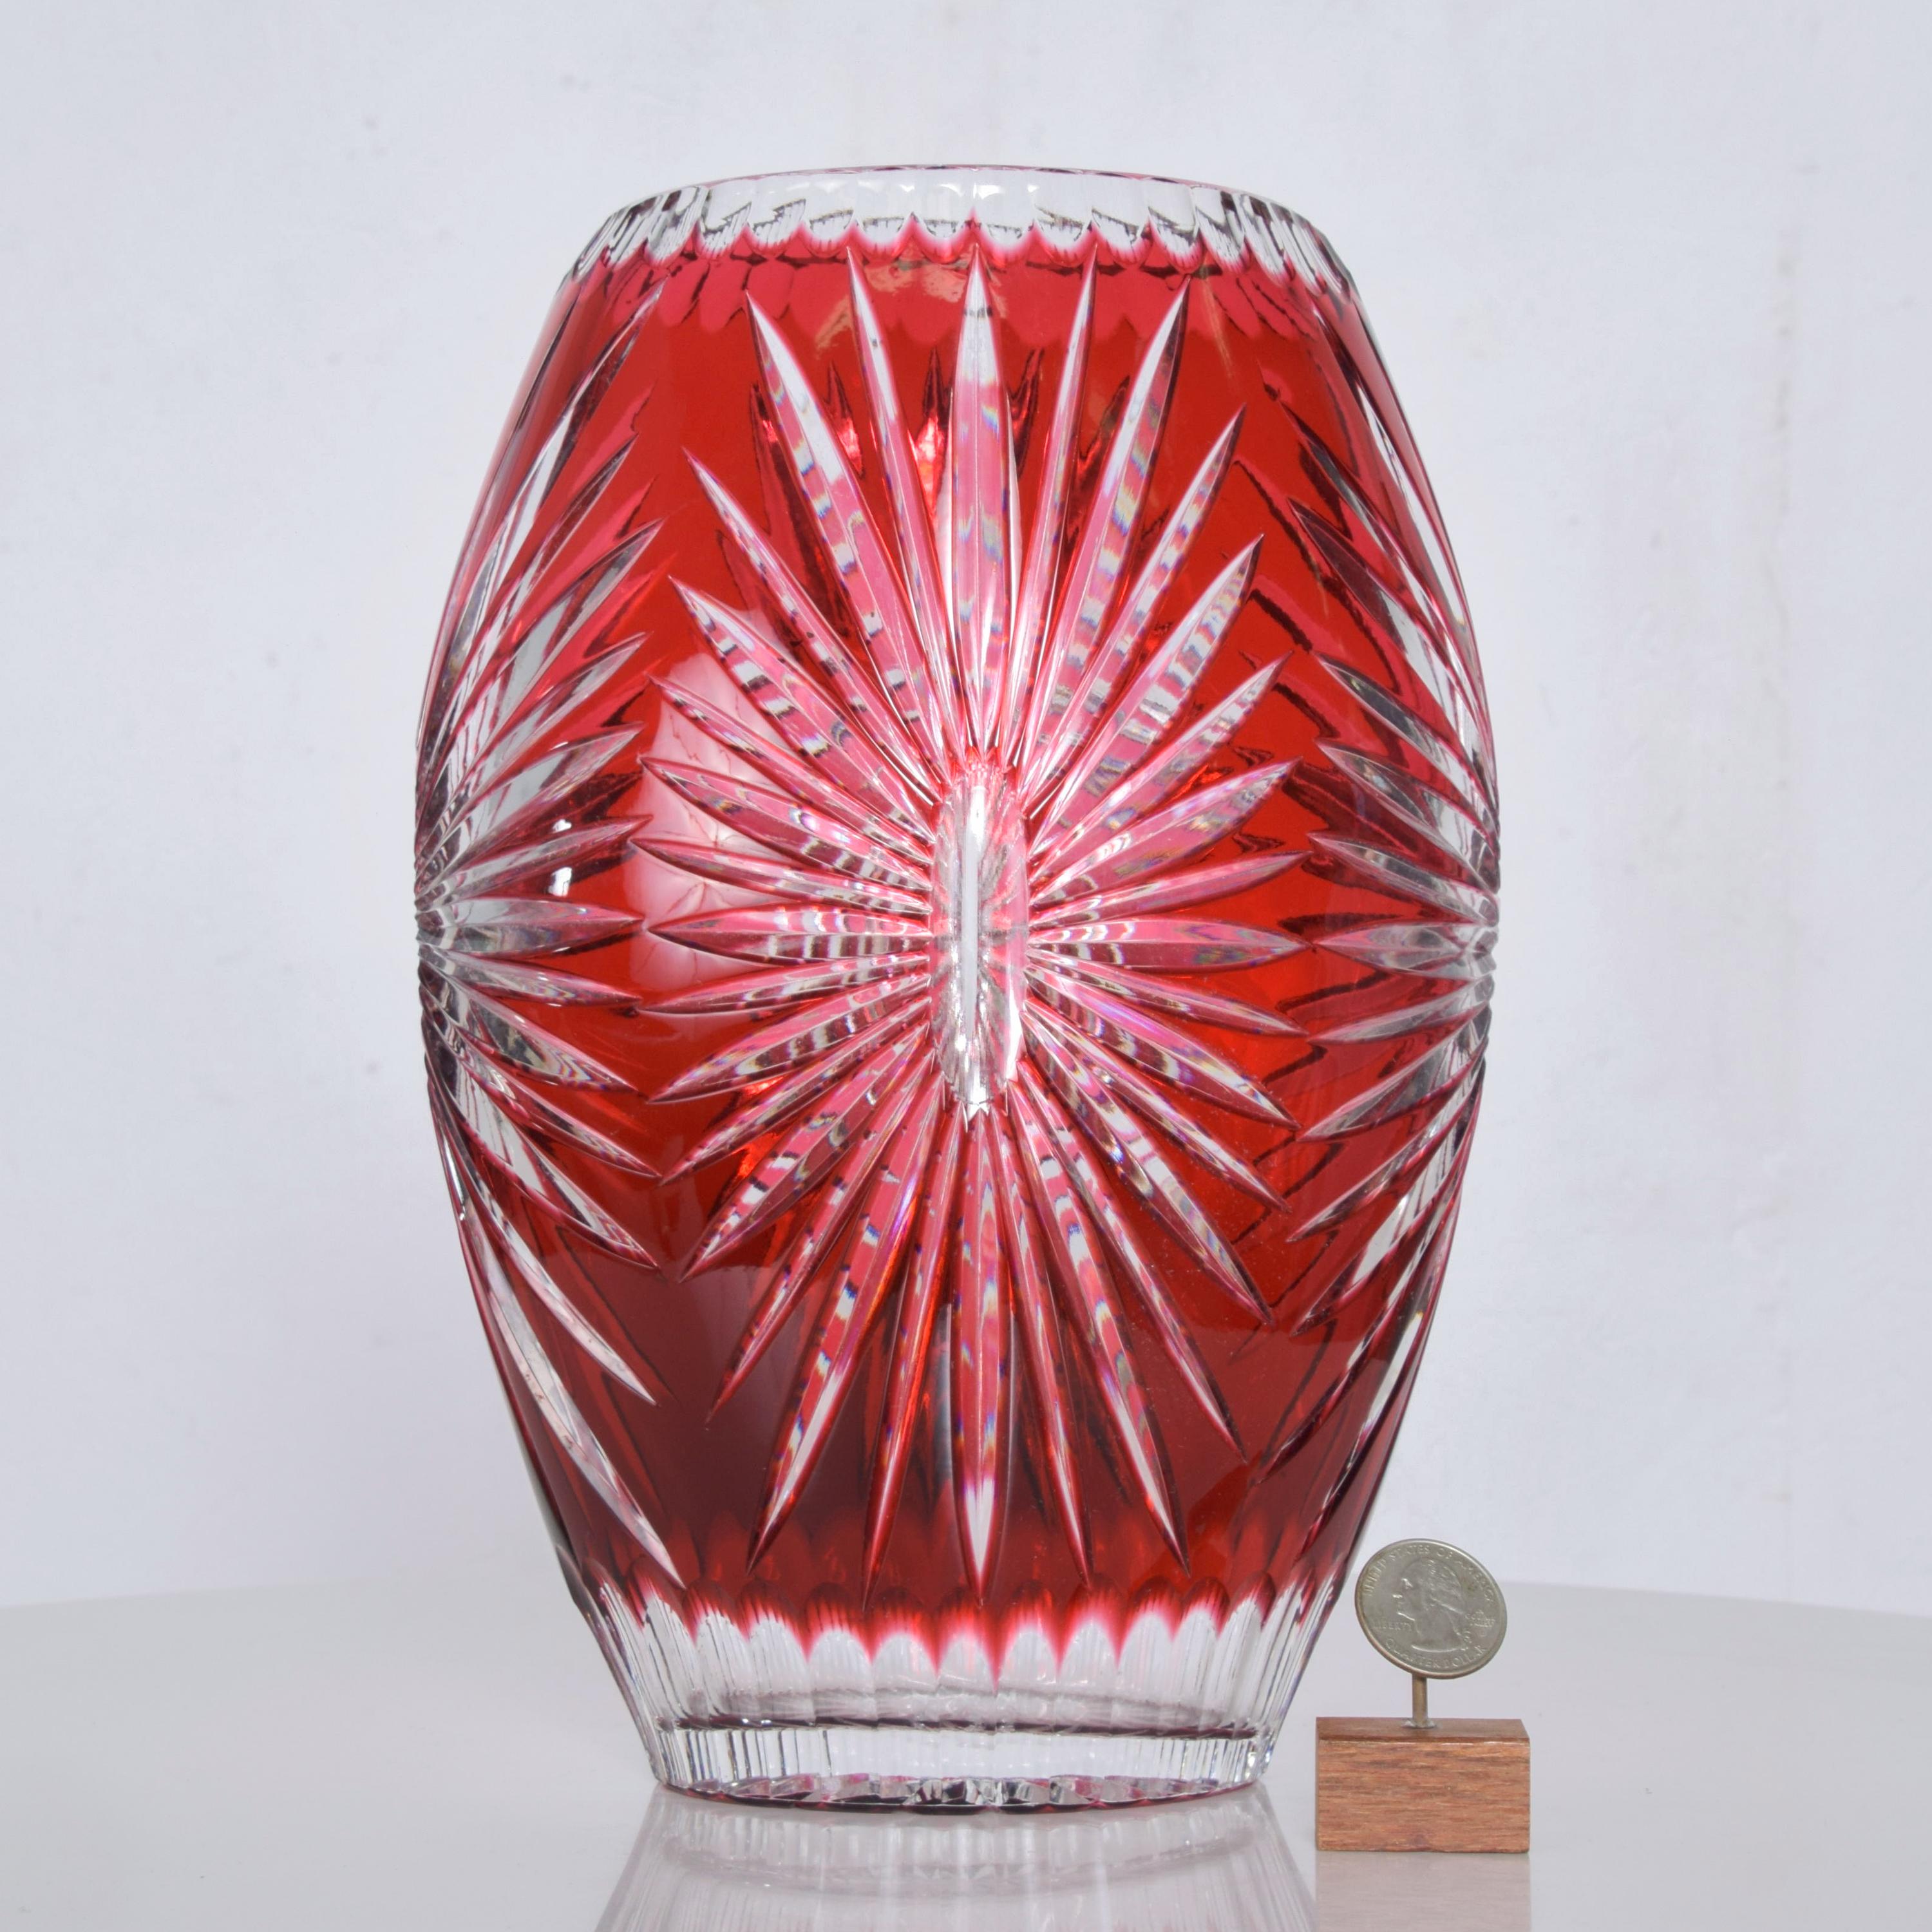 From Hungary Bohemian ruby red crystal clear cut vase
No label no signature present
Presents in the style of Ajka Claresta, Hungary
Dimensions: 10.25